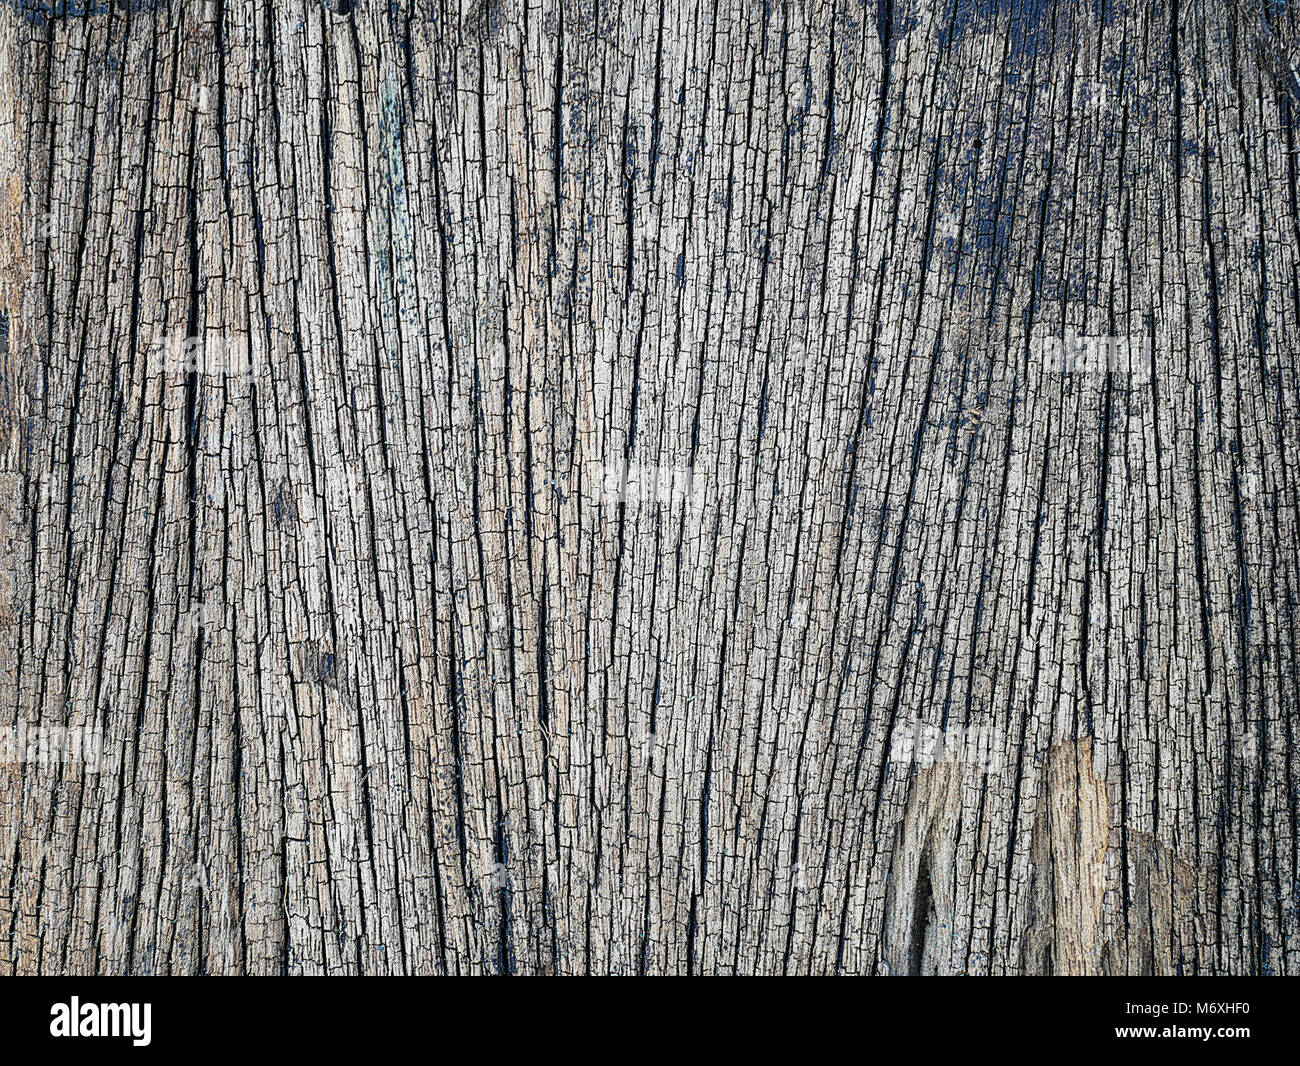 old wood texture. background for vintage background Stock Photo